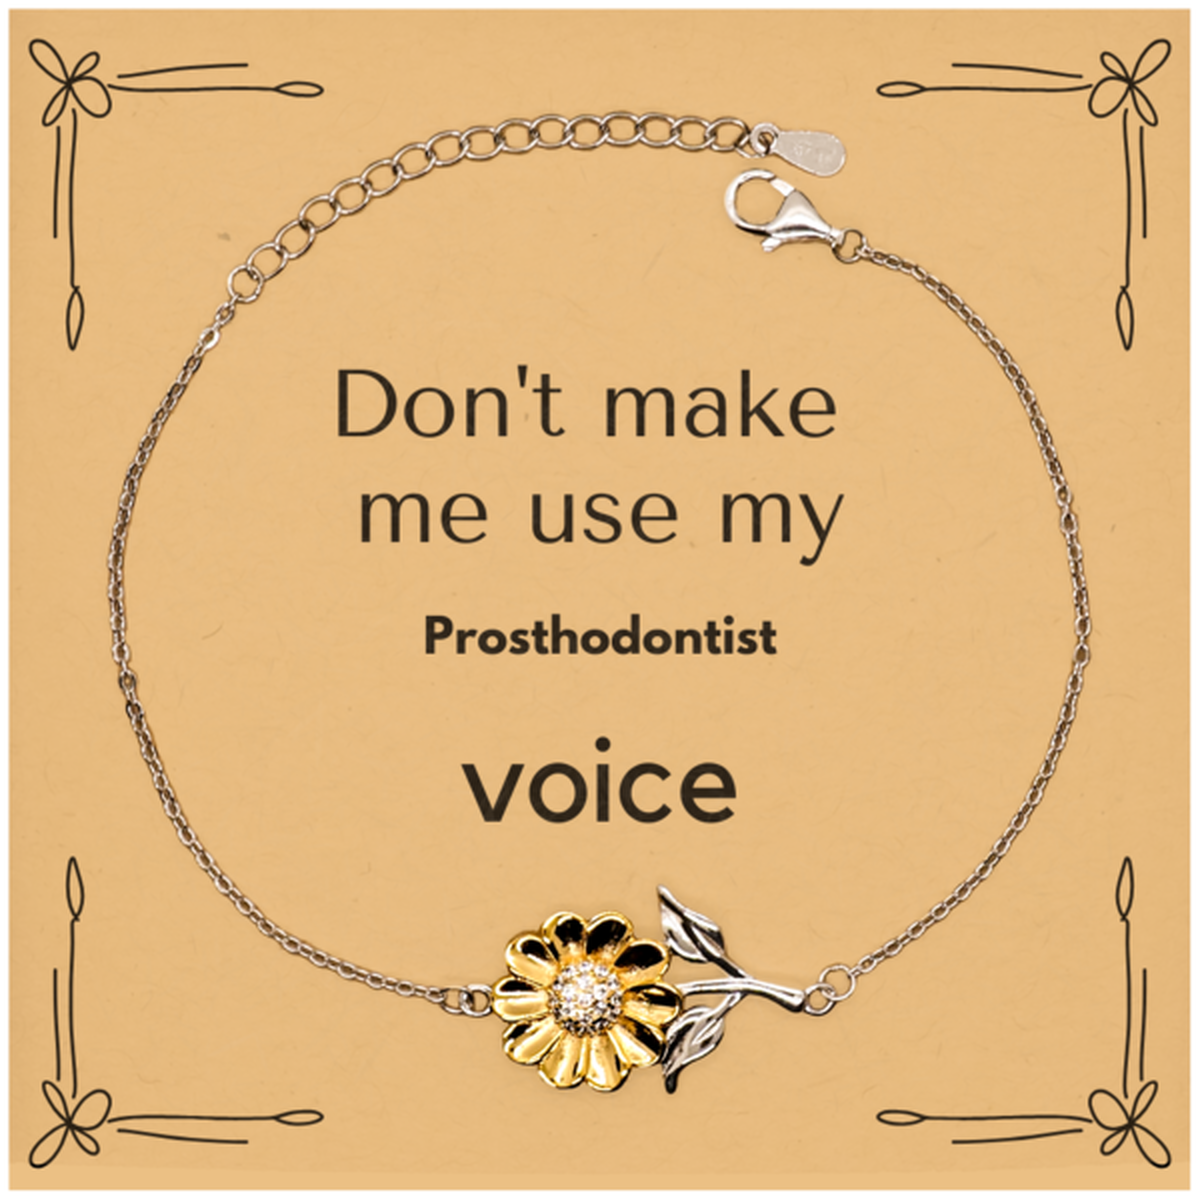 Don't make me use my Prosthodontist voice, Sarcasm Prosthodontist Card Gifts, Christmas Prosthodontist Sunflower Bracelet Birthday Unique Gifts For Prosthodontist Coworkers, Men, Women, Colleague, Friends